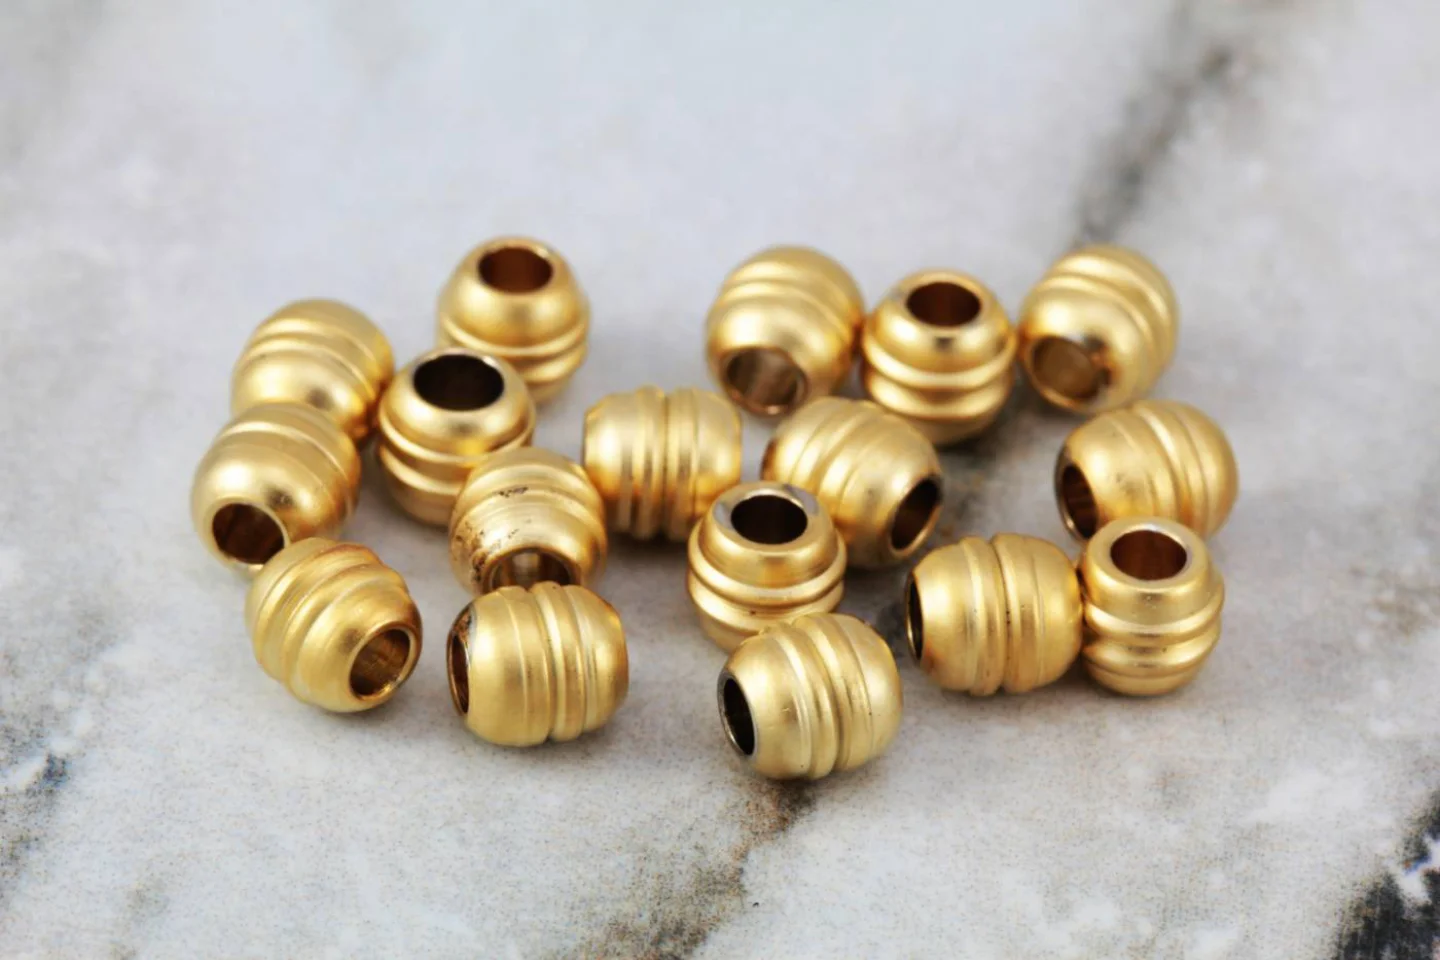 gold-plated-brass-5mm-round-spacer-beads.